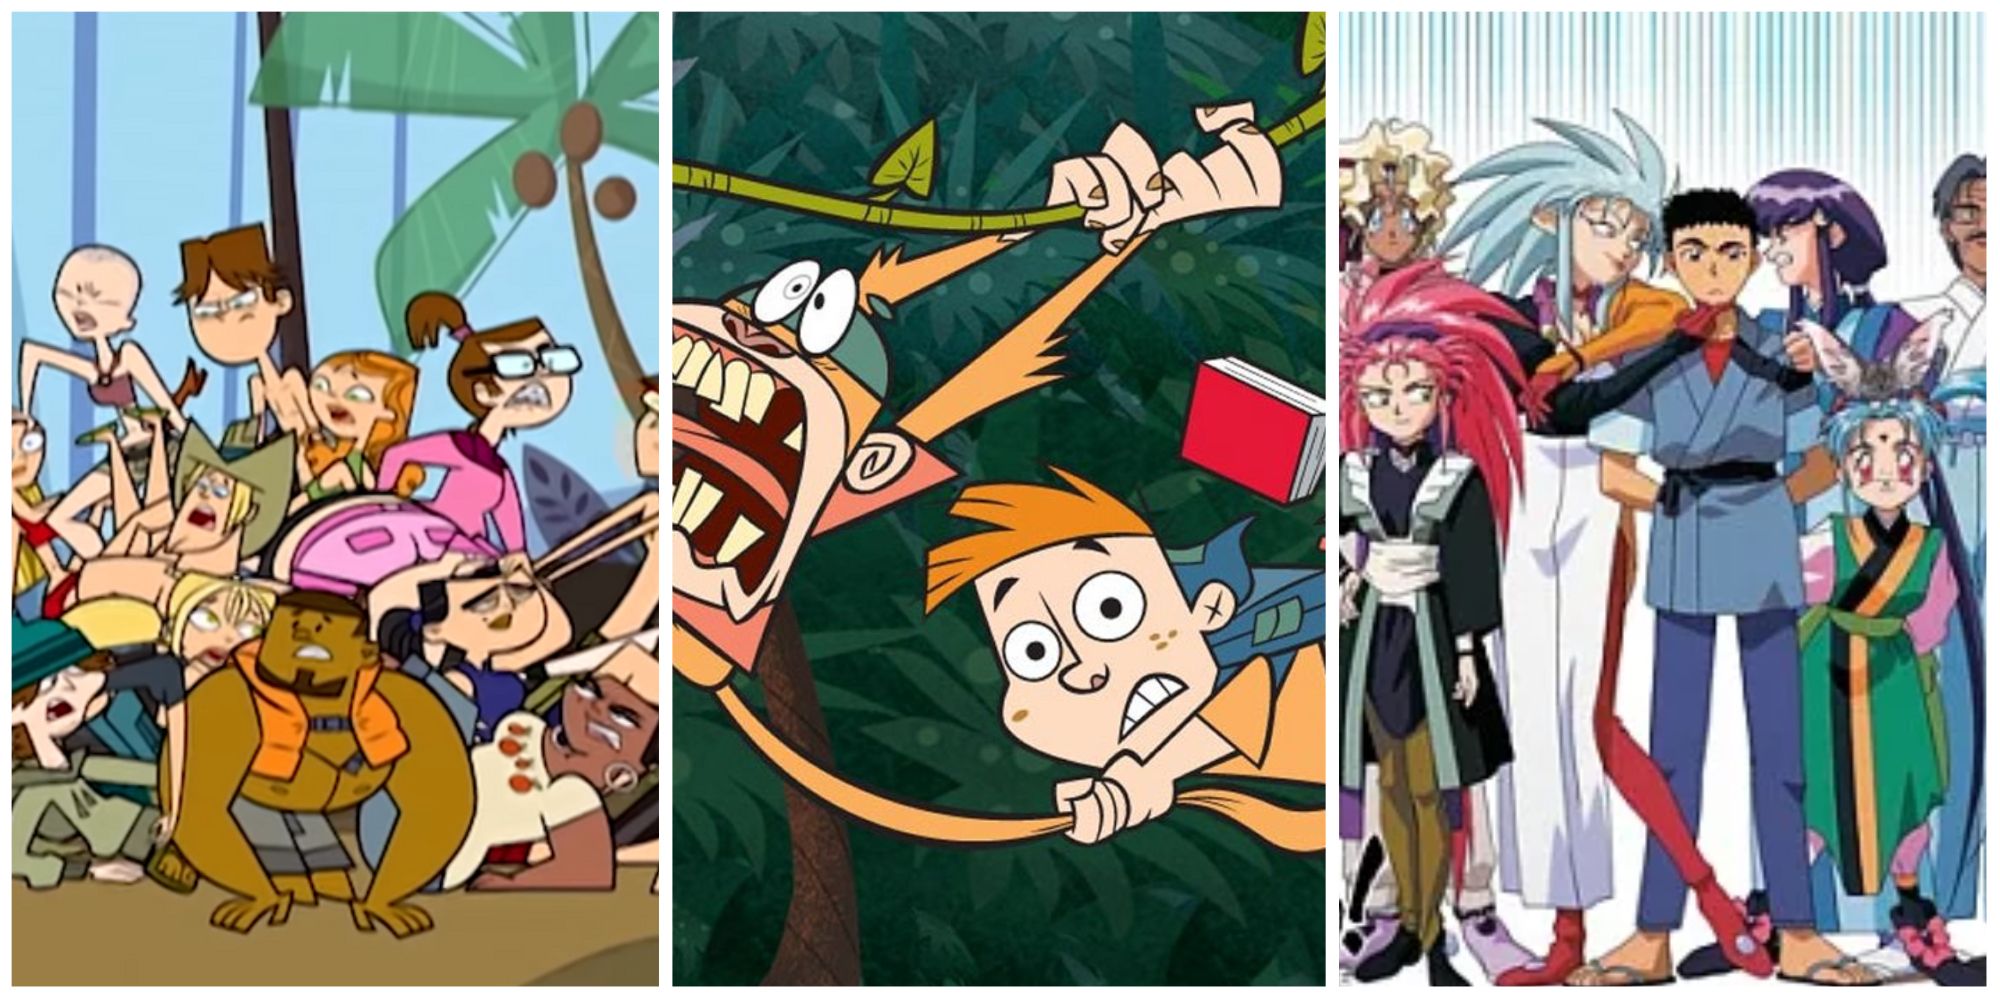 8 Cartoon Network Shows That Don't Really Hold Up Today